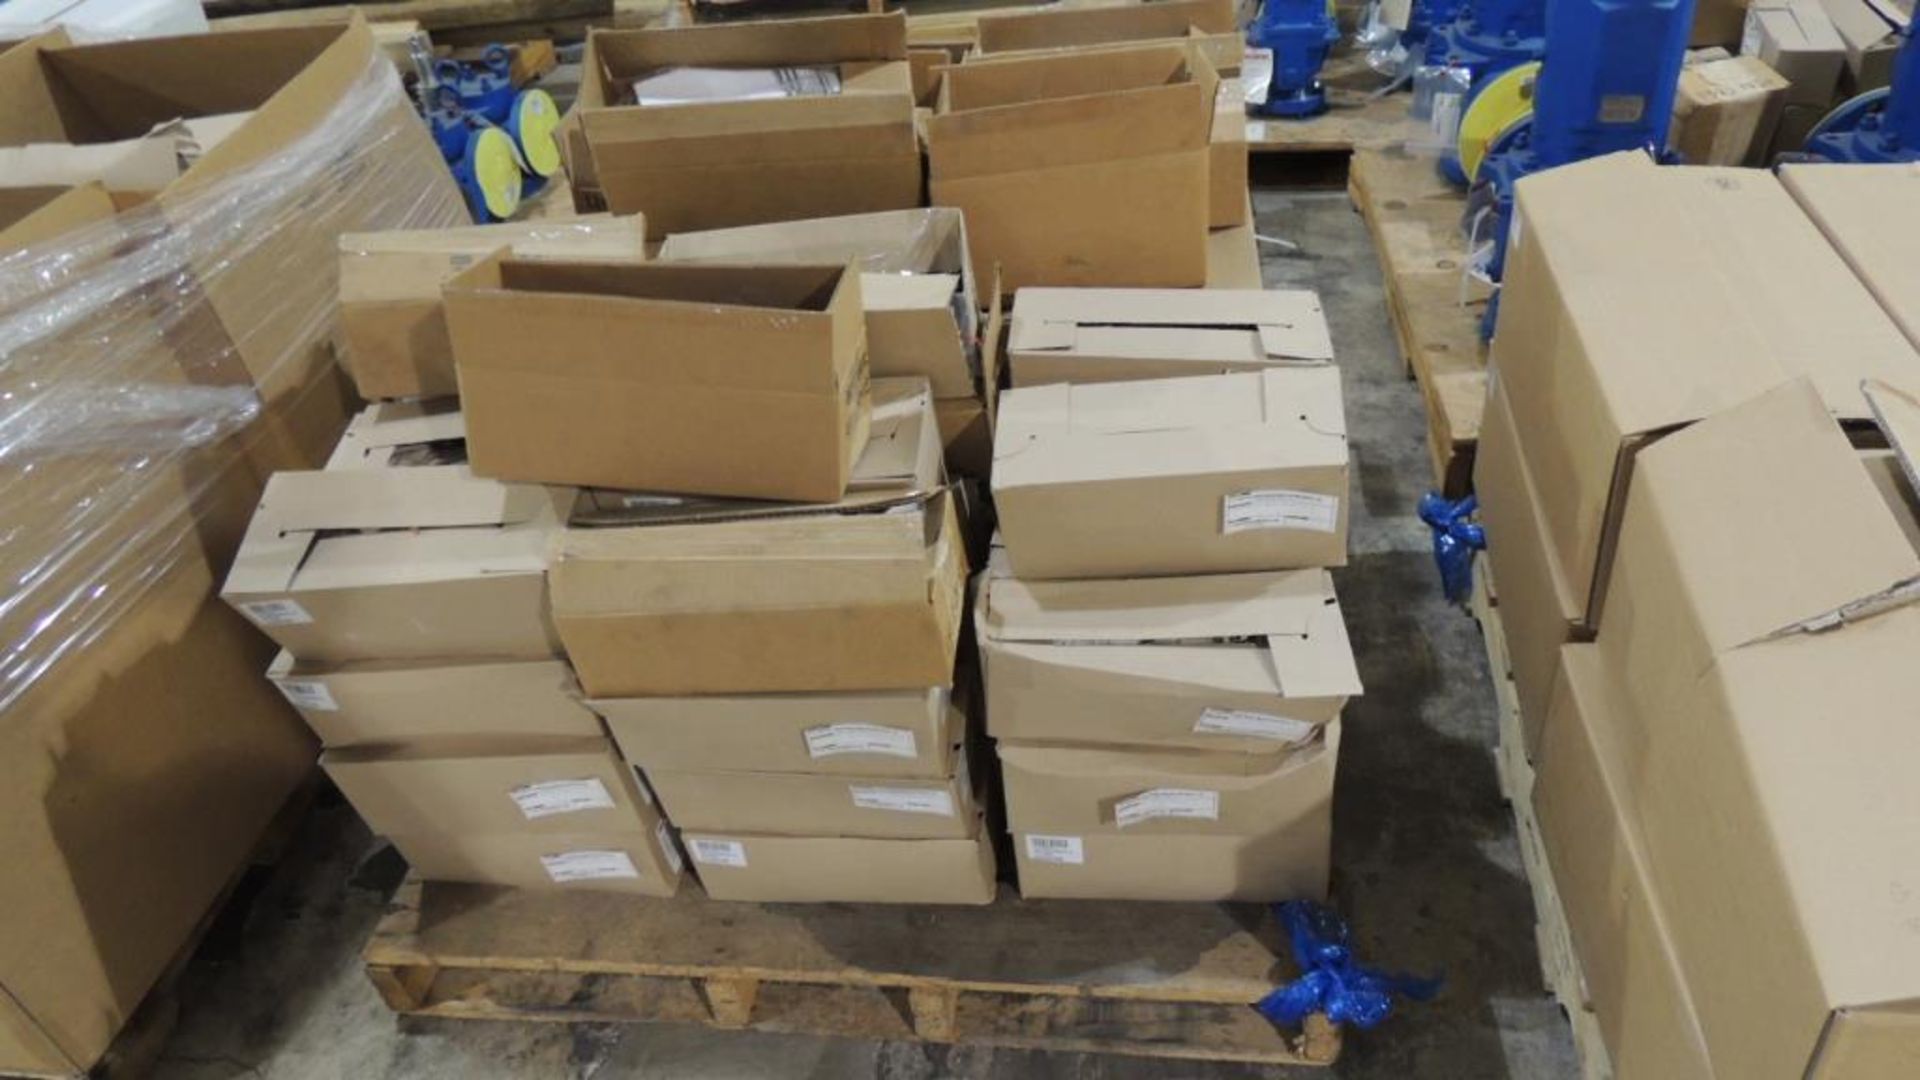 Large Quantity of Leser Relief and Safety Valves, plus Spare Parts Kits - Image 365 of 374